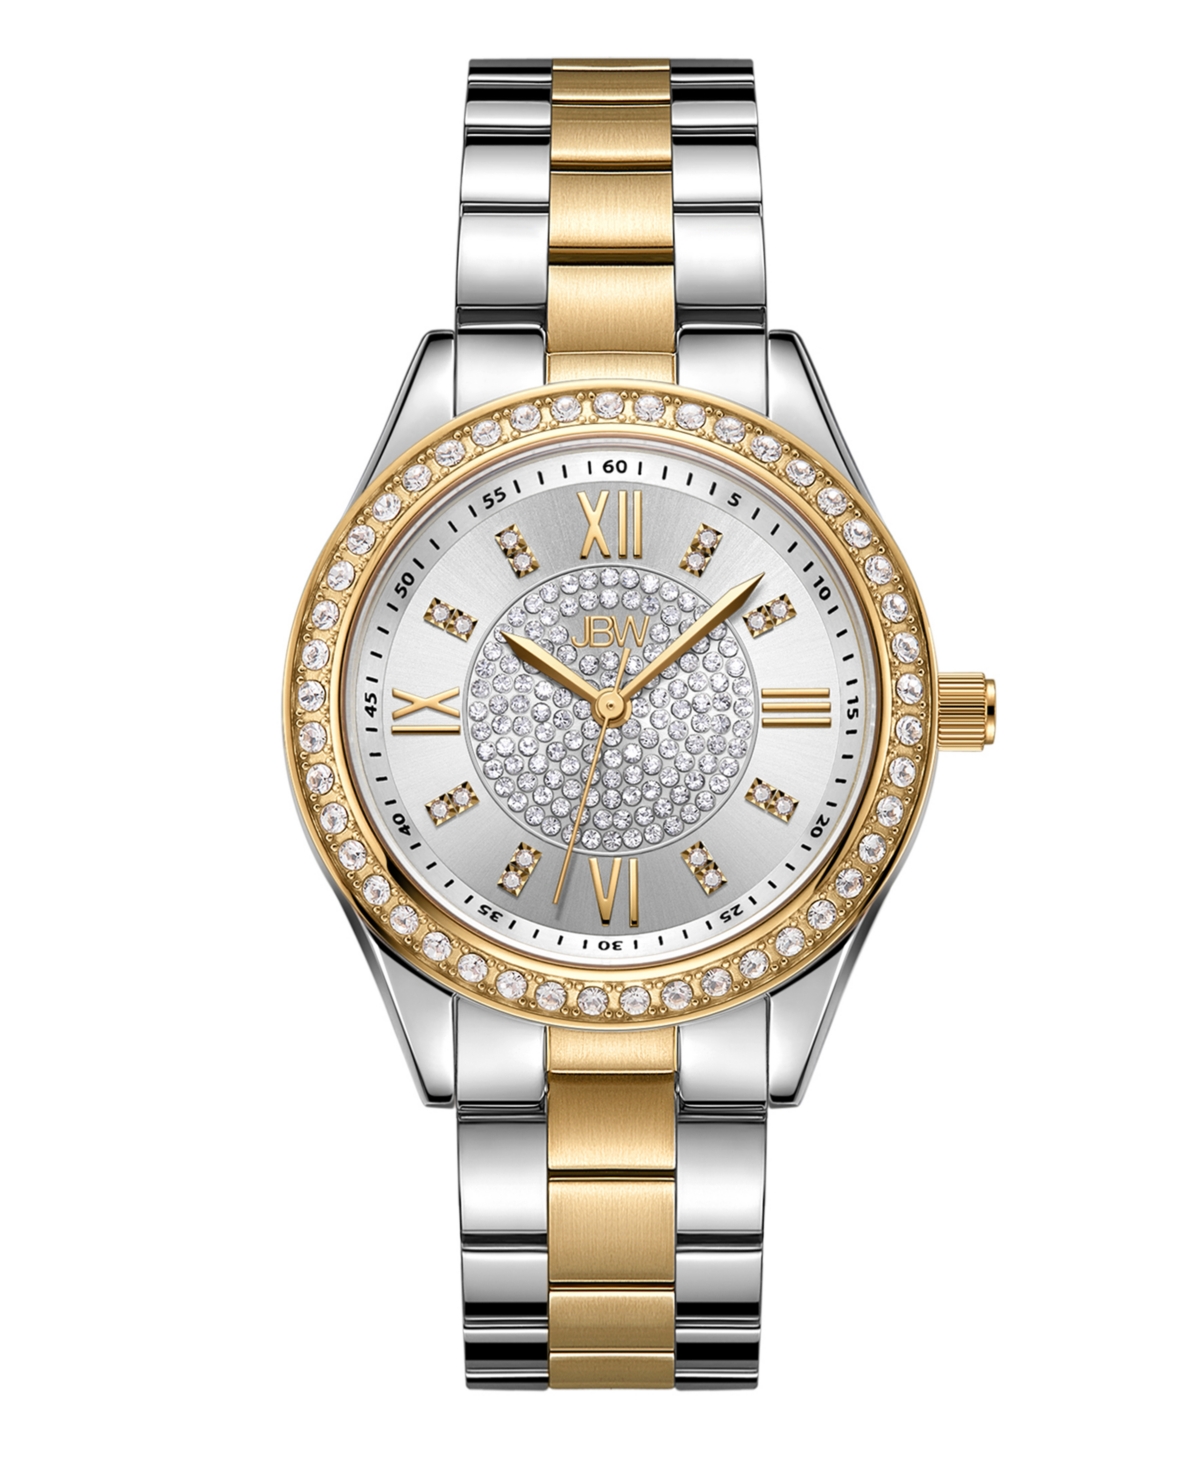 JBW WOMEN'S MONDRIAN TWO-TONE 18K GOLD-PLATED STAINLESS STEEL WATCH, 34MM